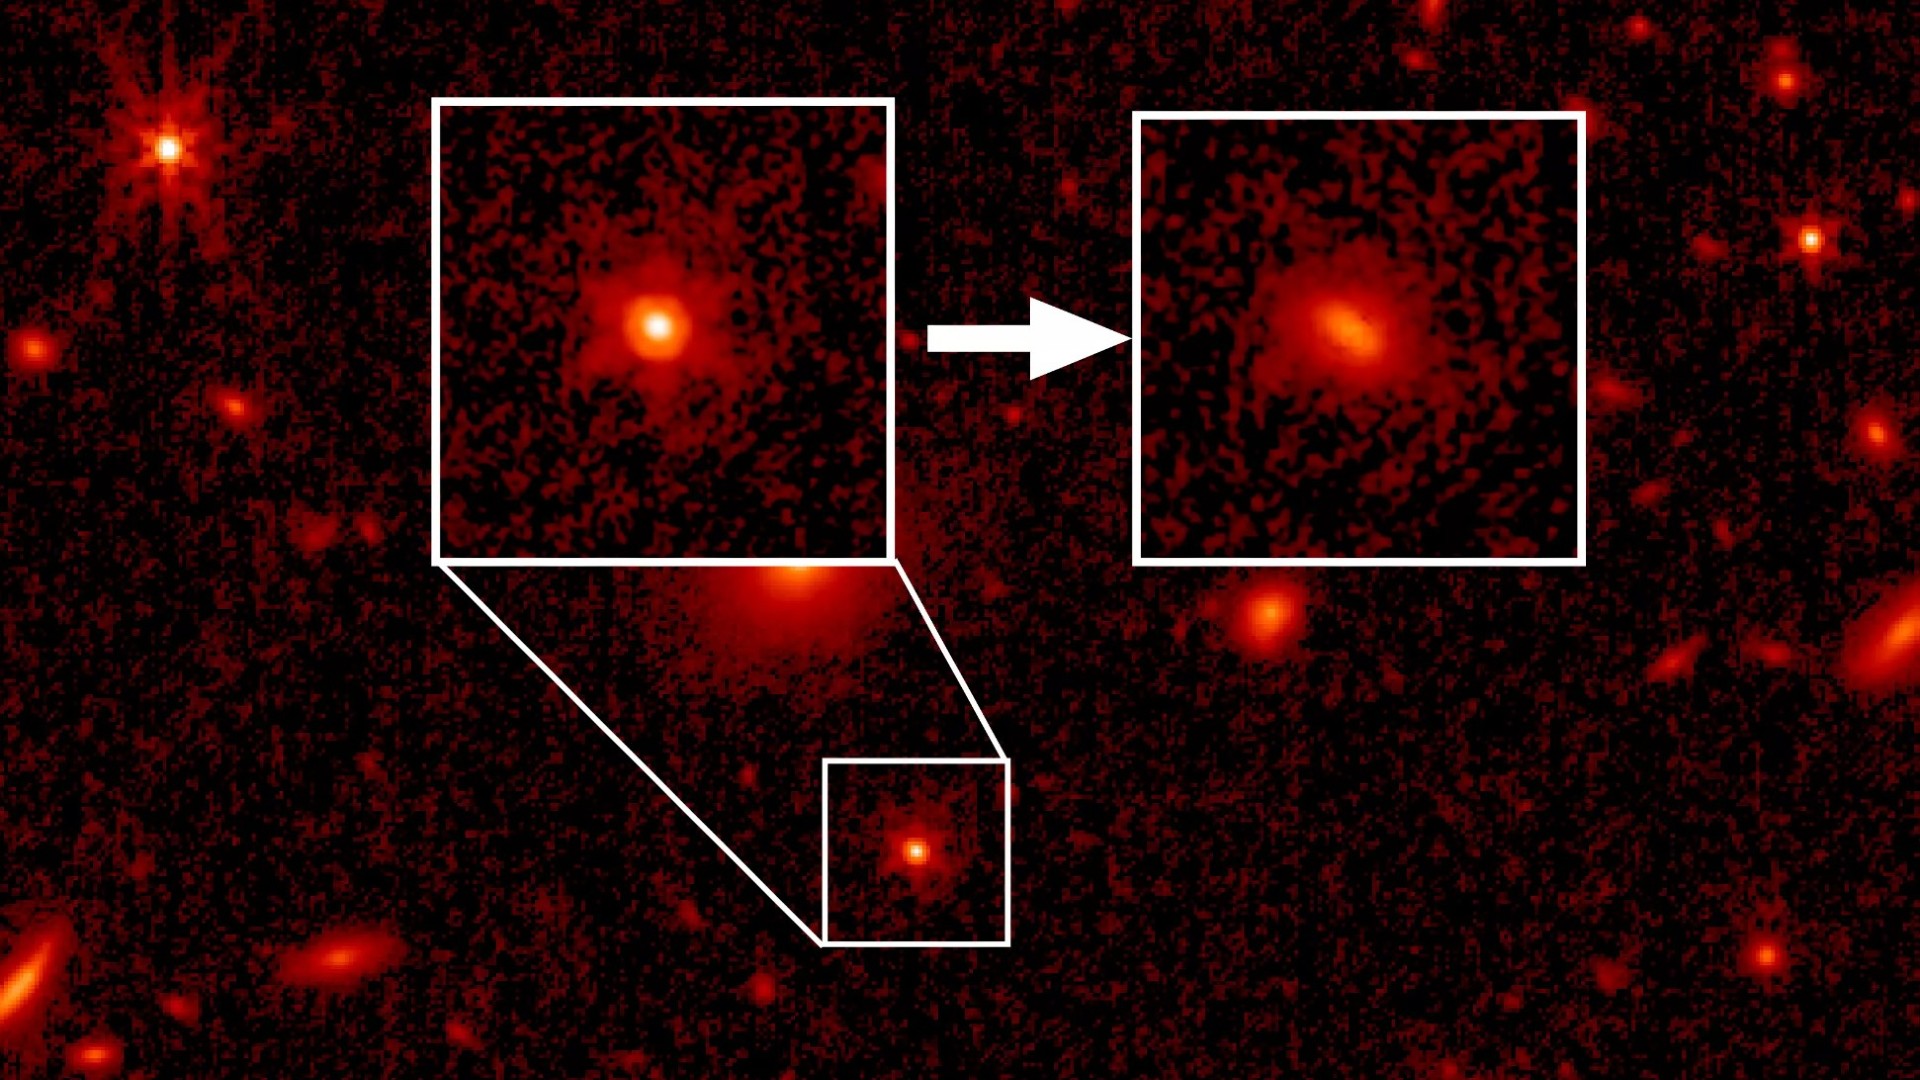 a black hole appears as a red smudge in a telescope image